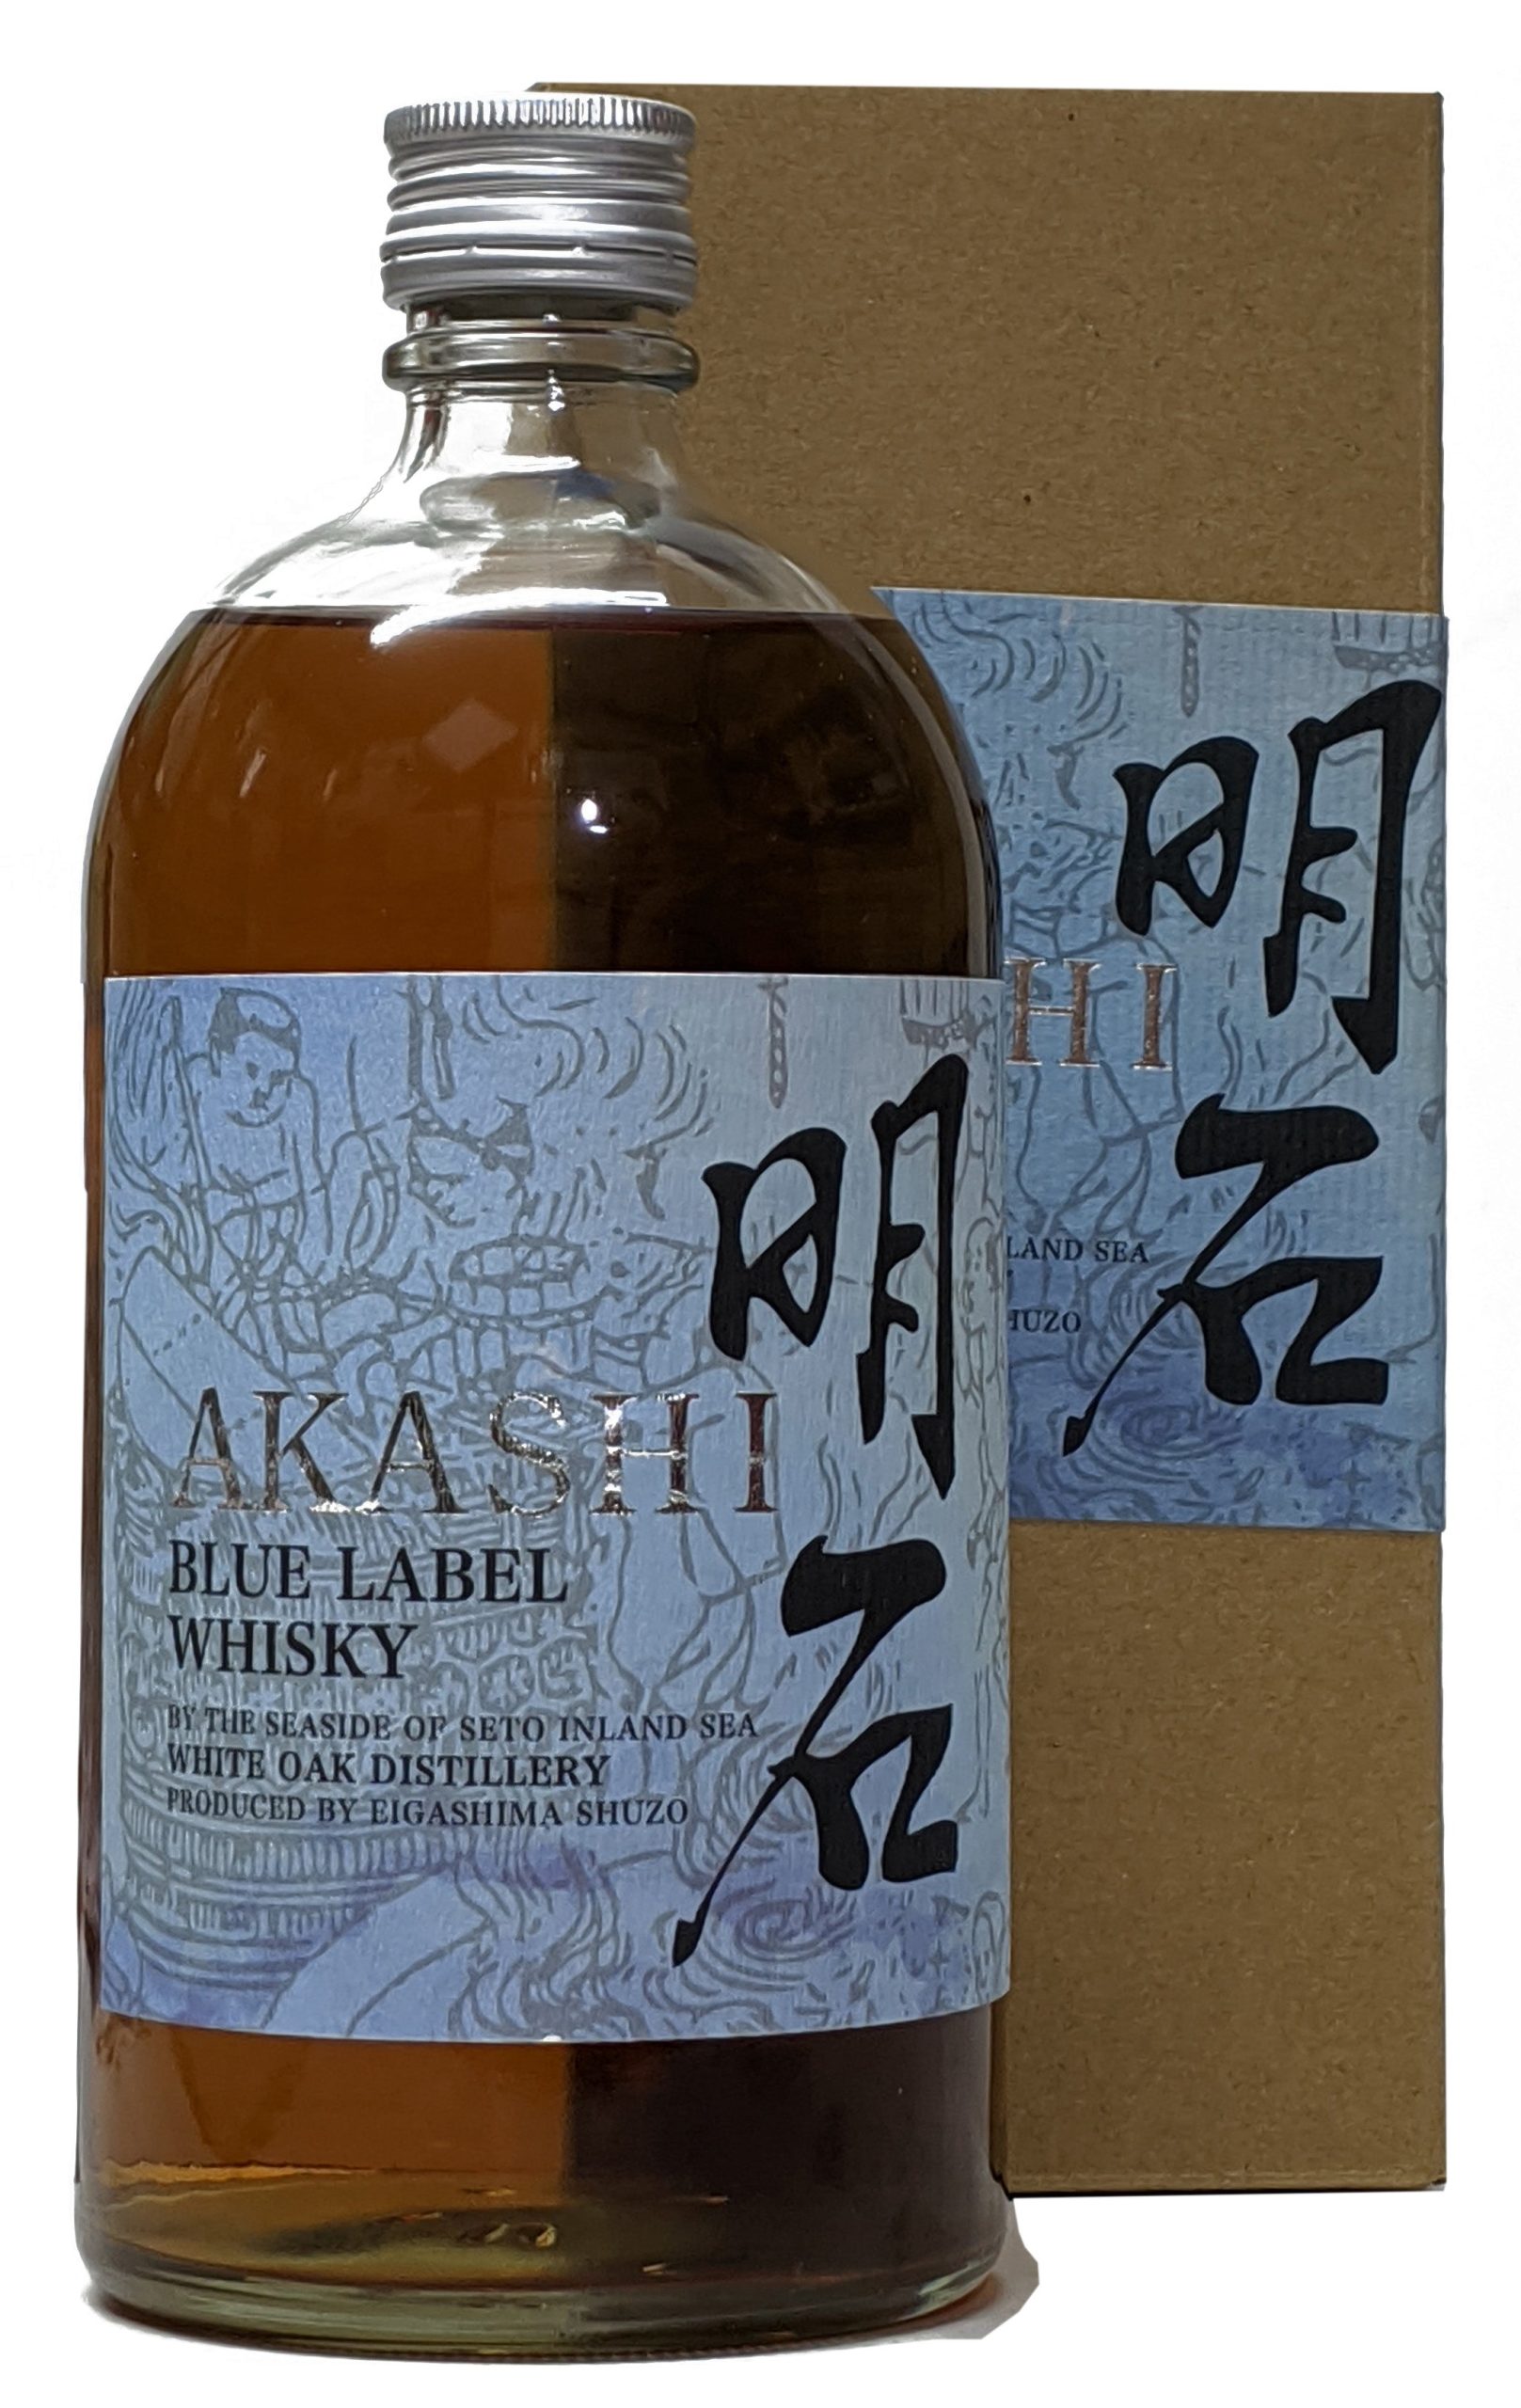 Akashi Blue Label Whisky akashi It's a great price for the money